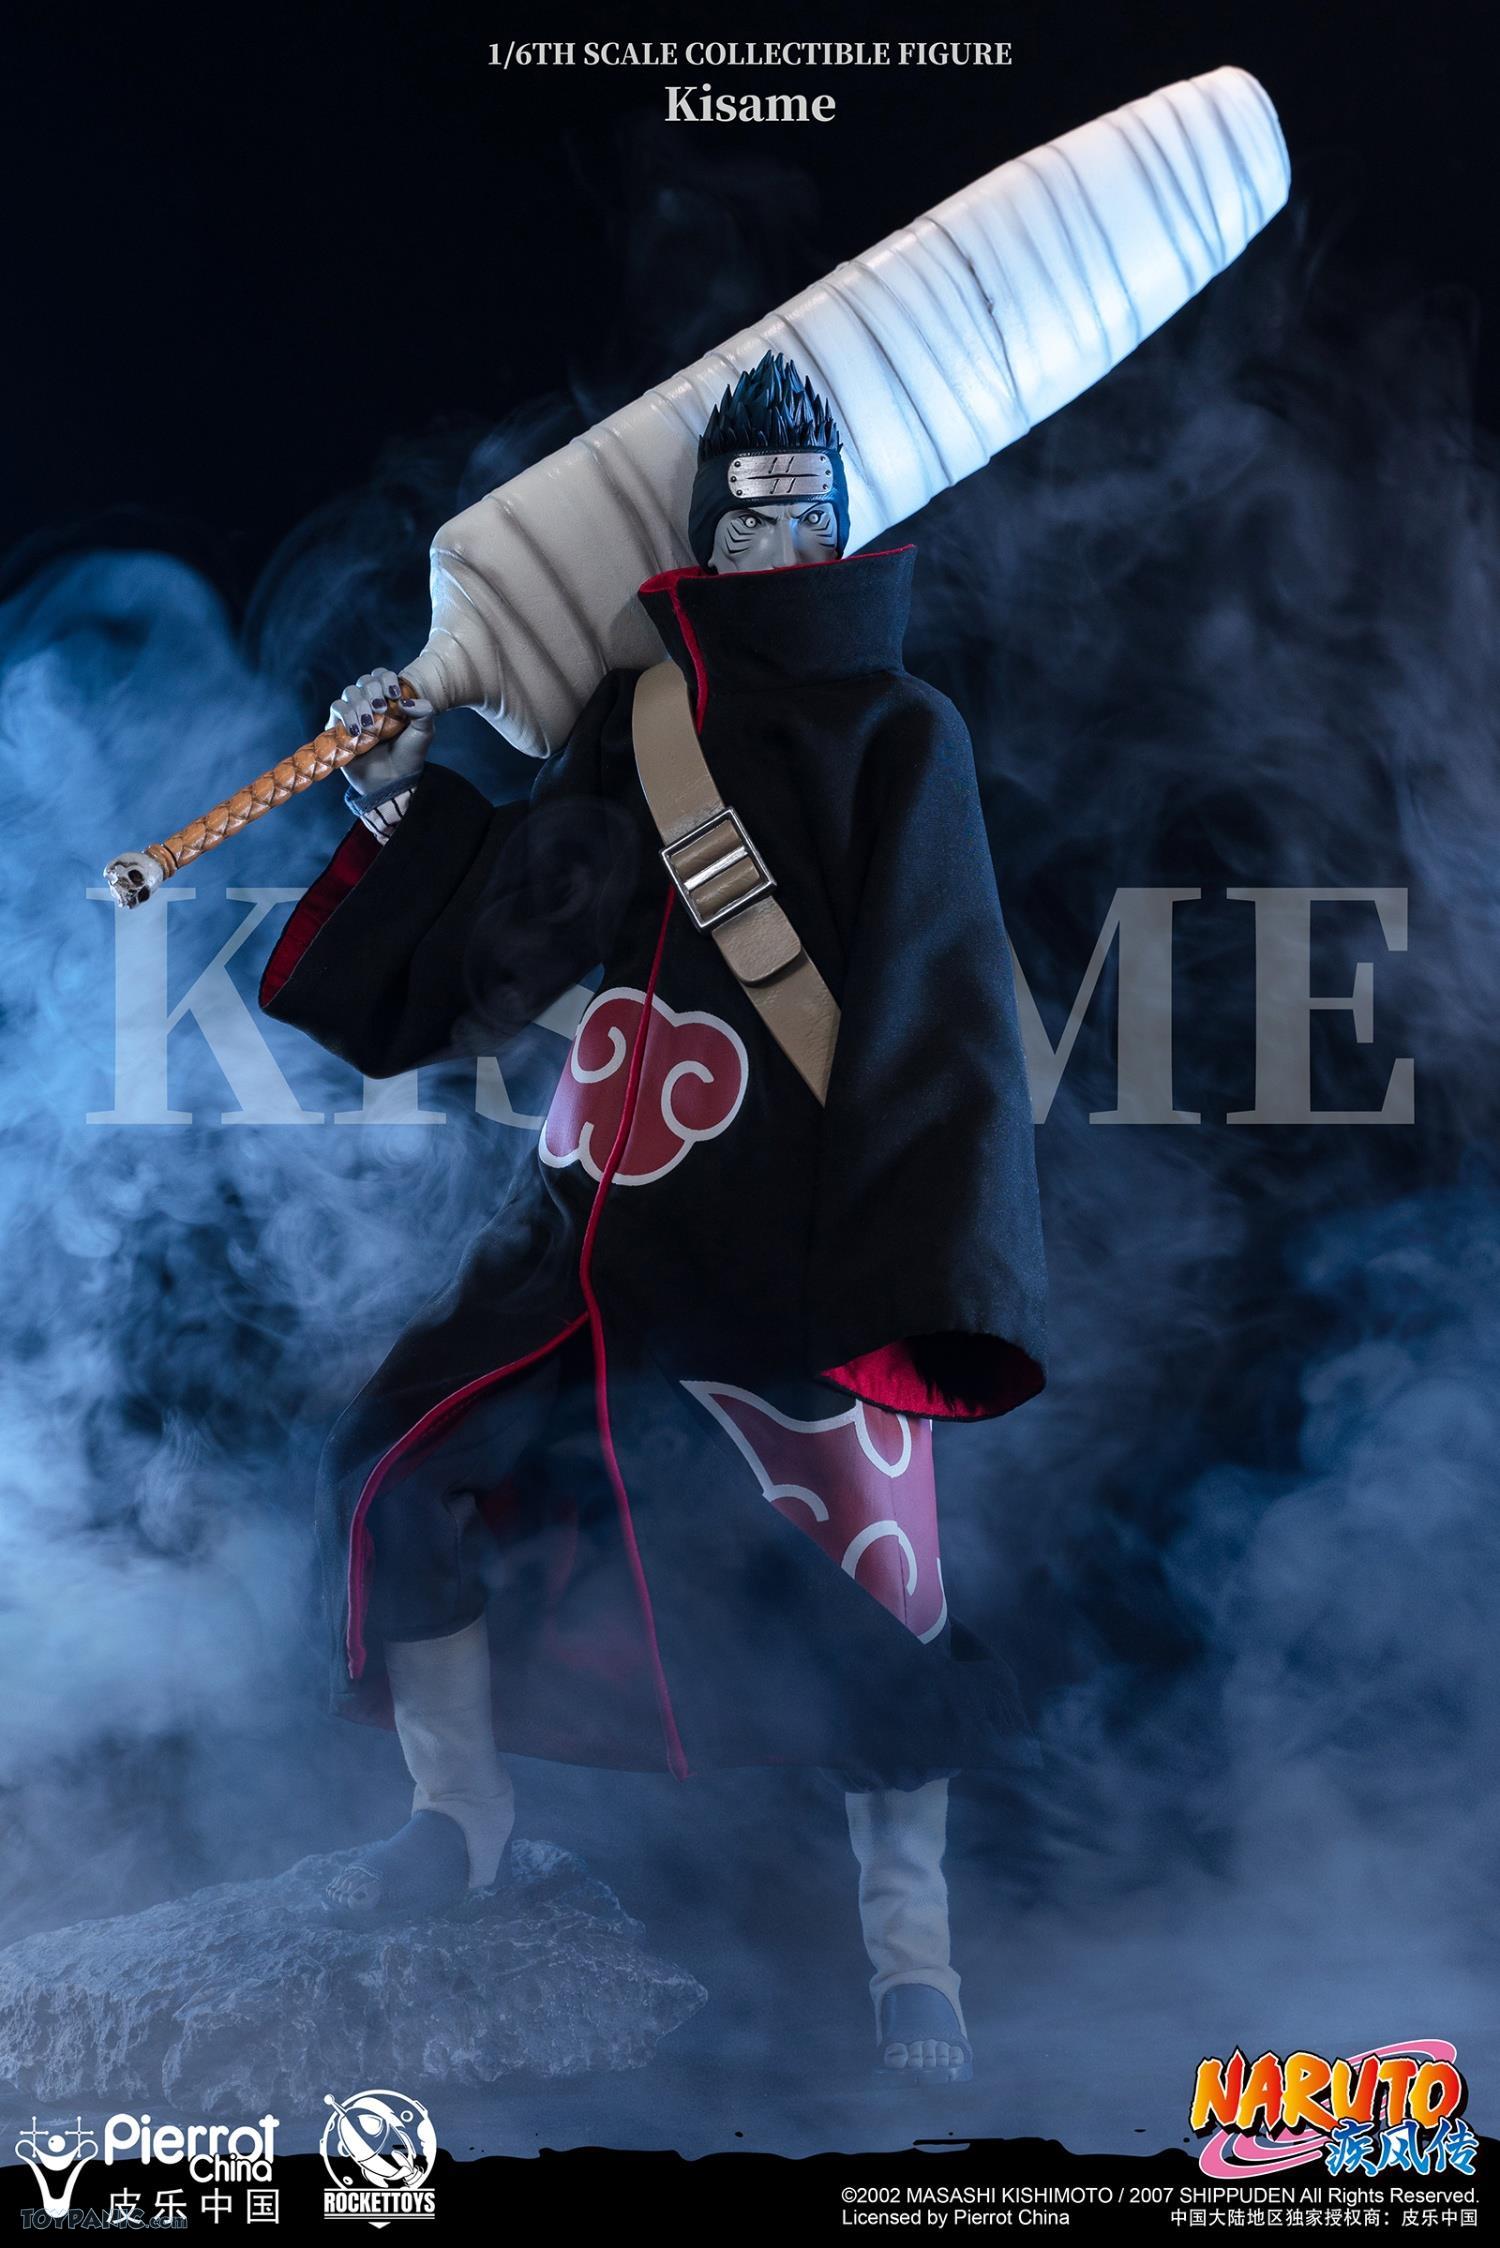 rockettoys - NEW PRODUCT: Rocket Toys ROC-007 1/6 Scale Kisame 221202460433PM_5828364